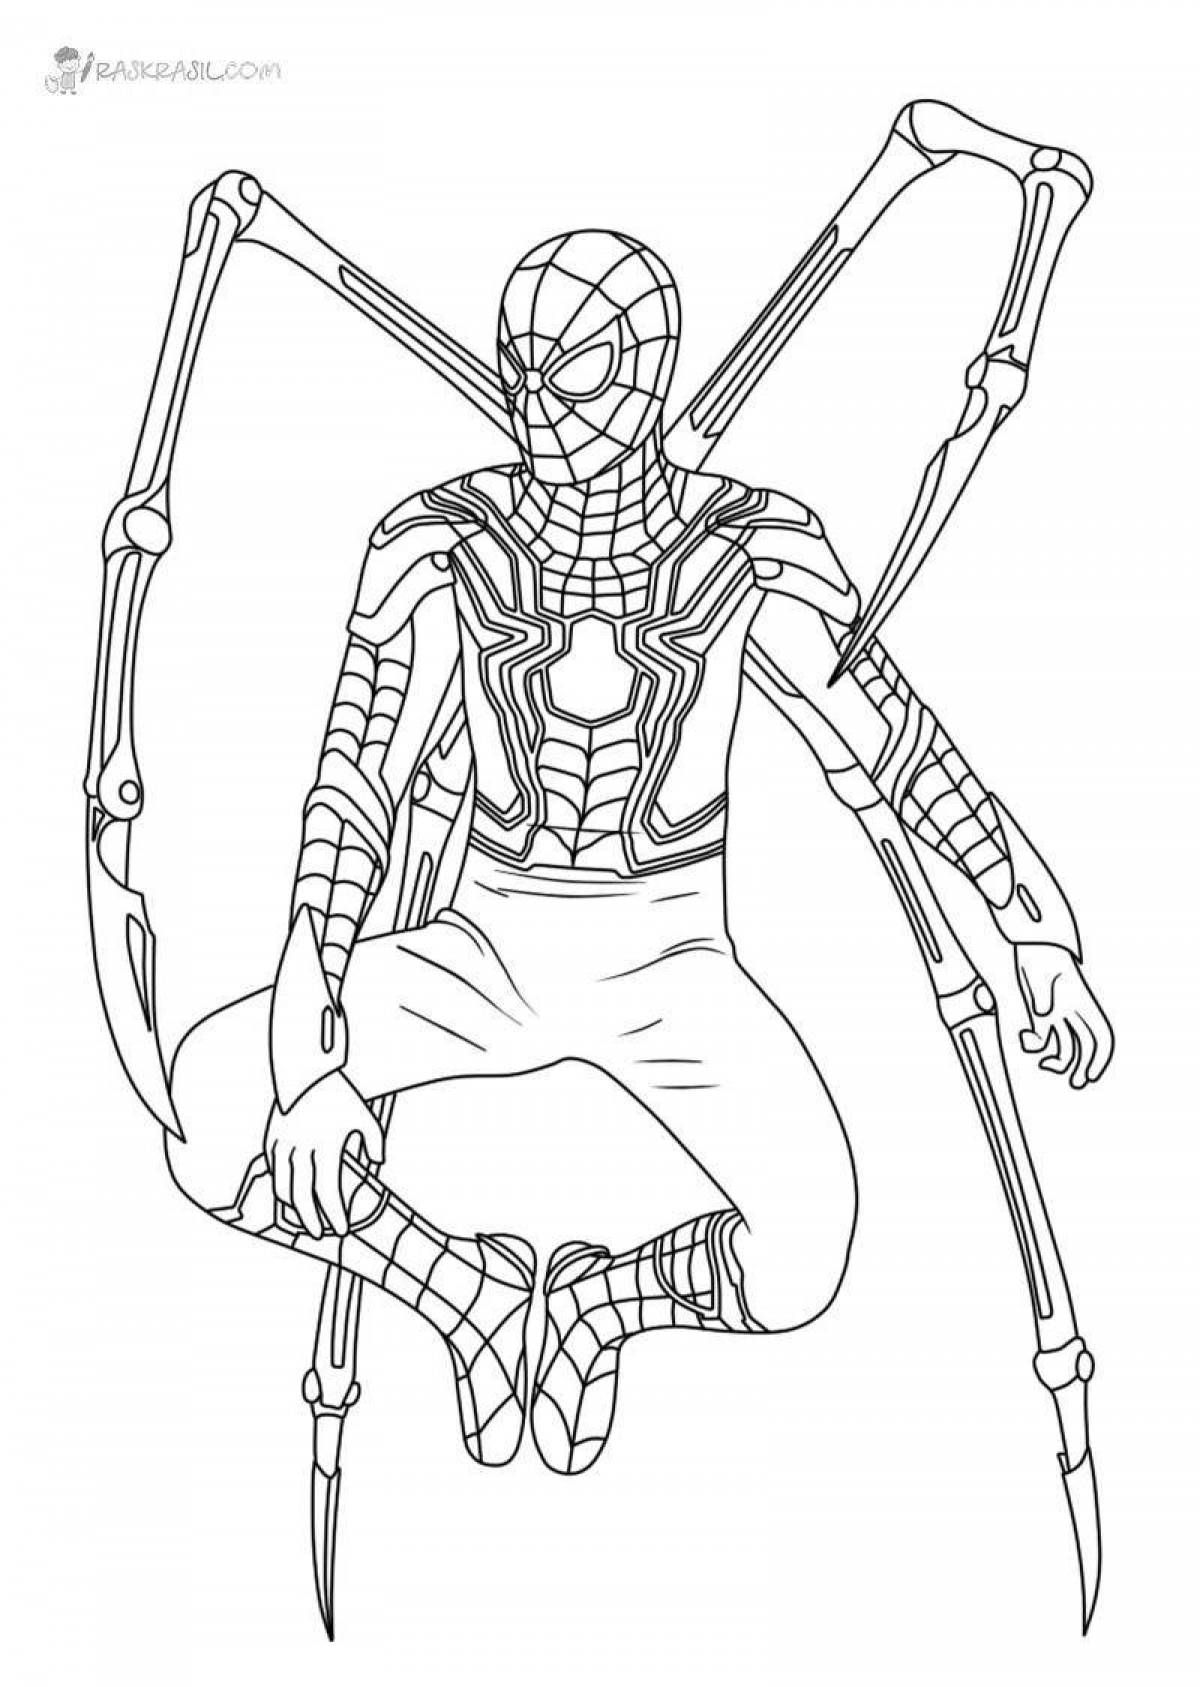 Fabulous spider man with shield coloring page